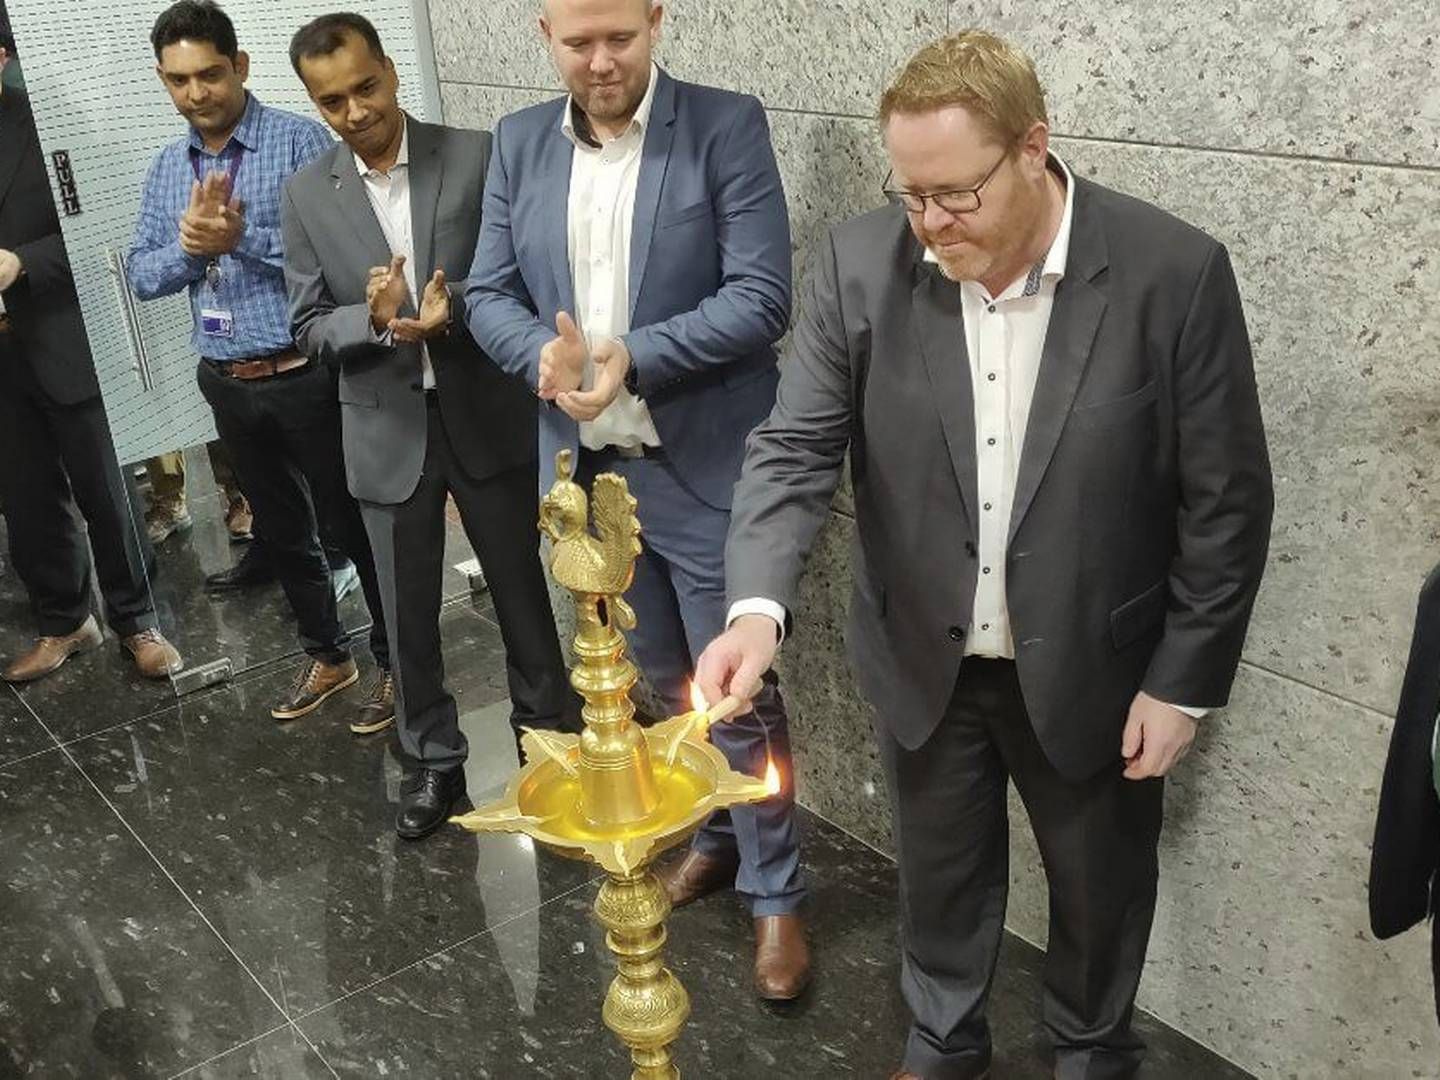 In 2018, Siemens Gamesa's Chief Technology Officer Morten Pilgaard Rasmussen attended the inauguration of a new O&M center in Chennai. Now, however, the winds appear to have changed. | Photo: Siemens Gamesa